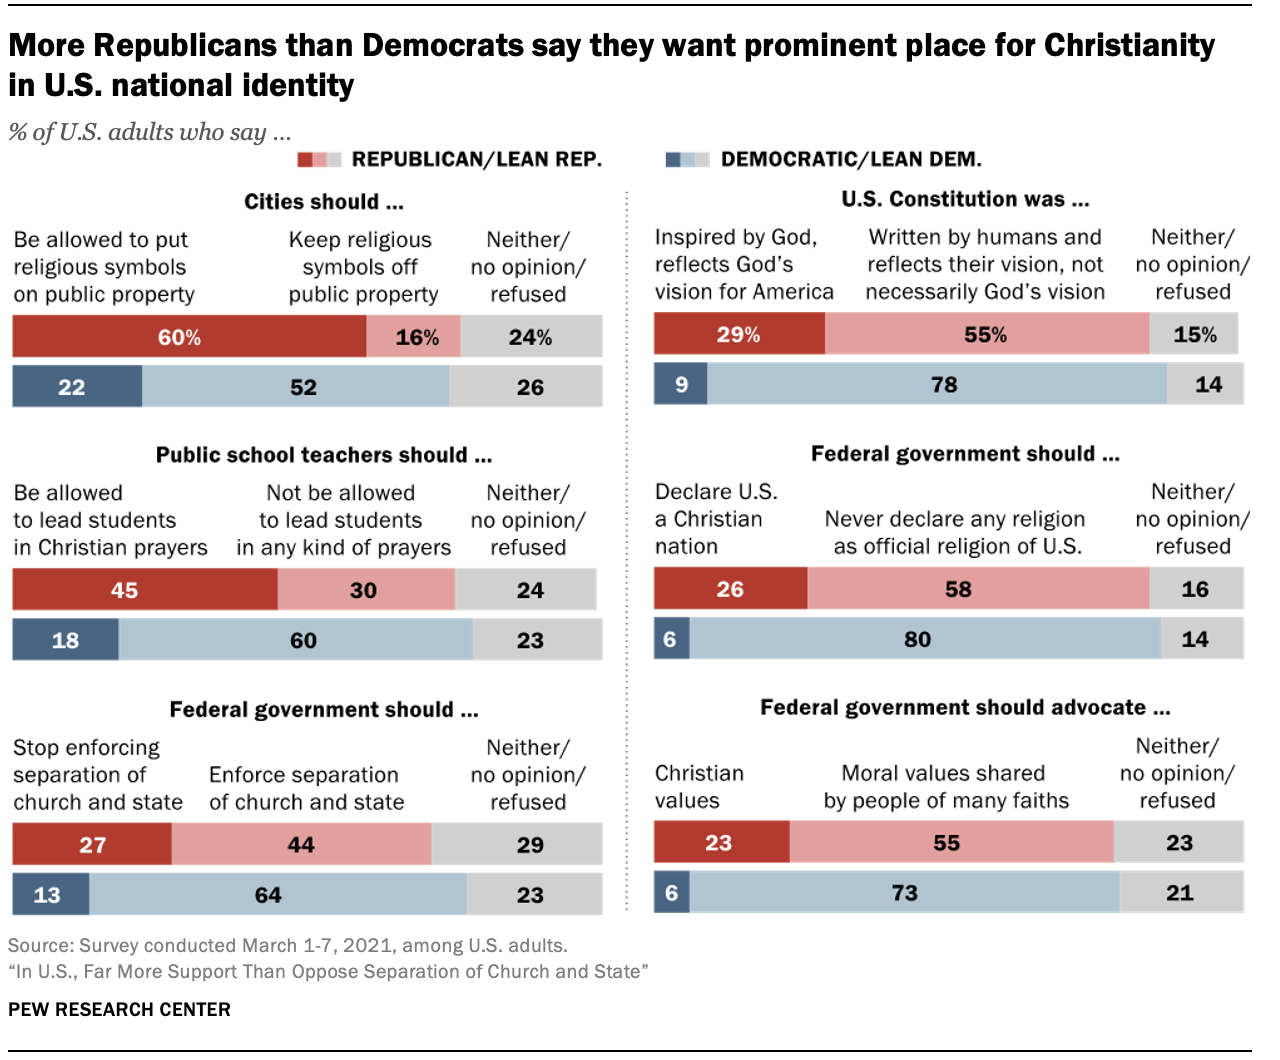 More Republicans than Democrats say they want prominent place for Christianity in U.S. national identity